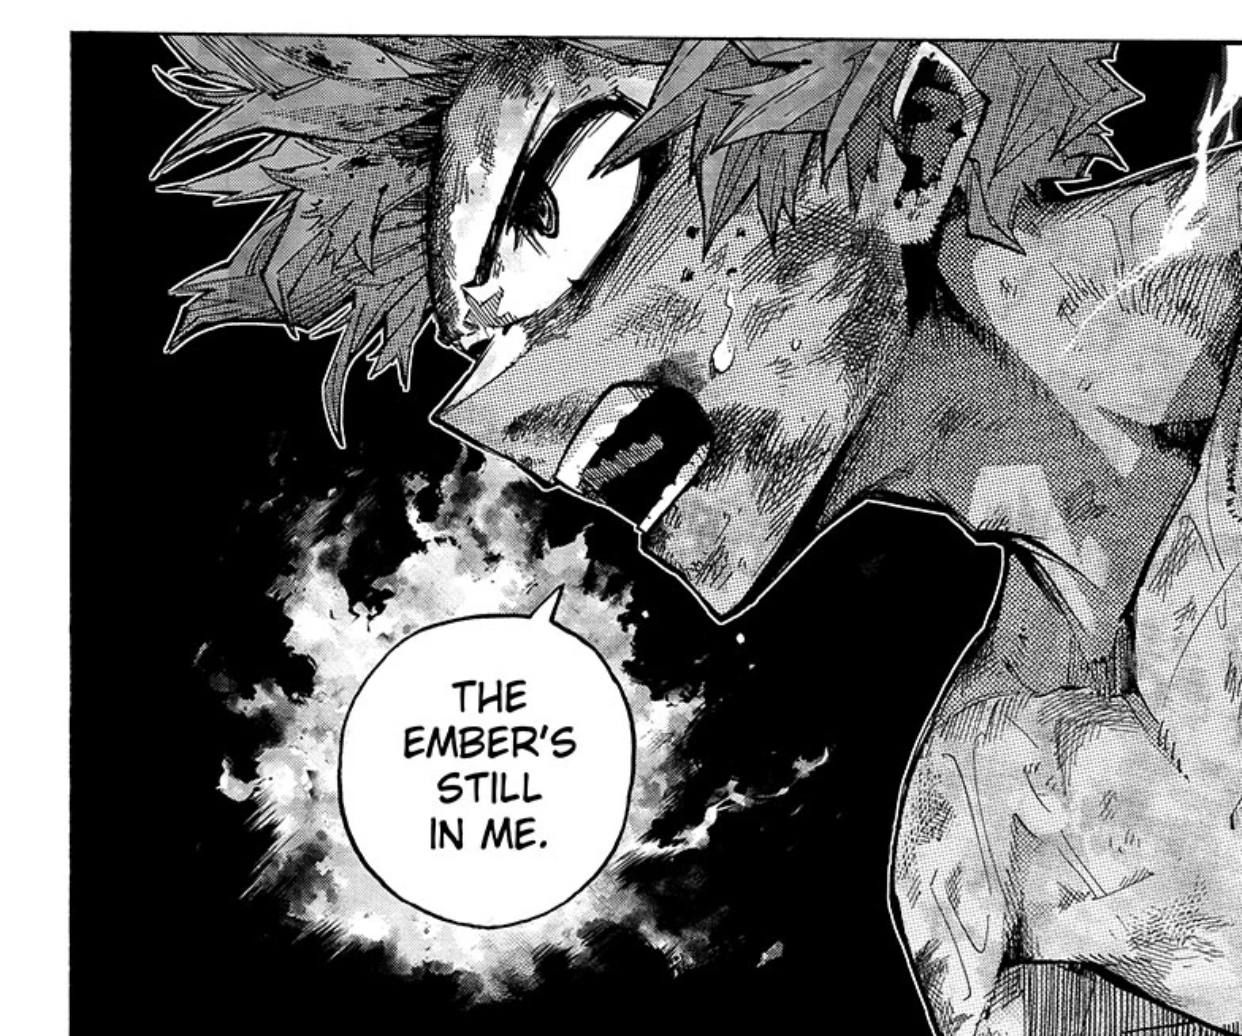 What Happens to One for All in the MHA Manga?